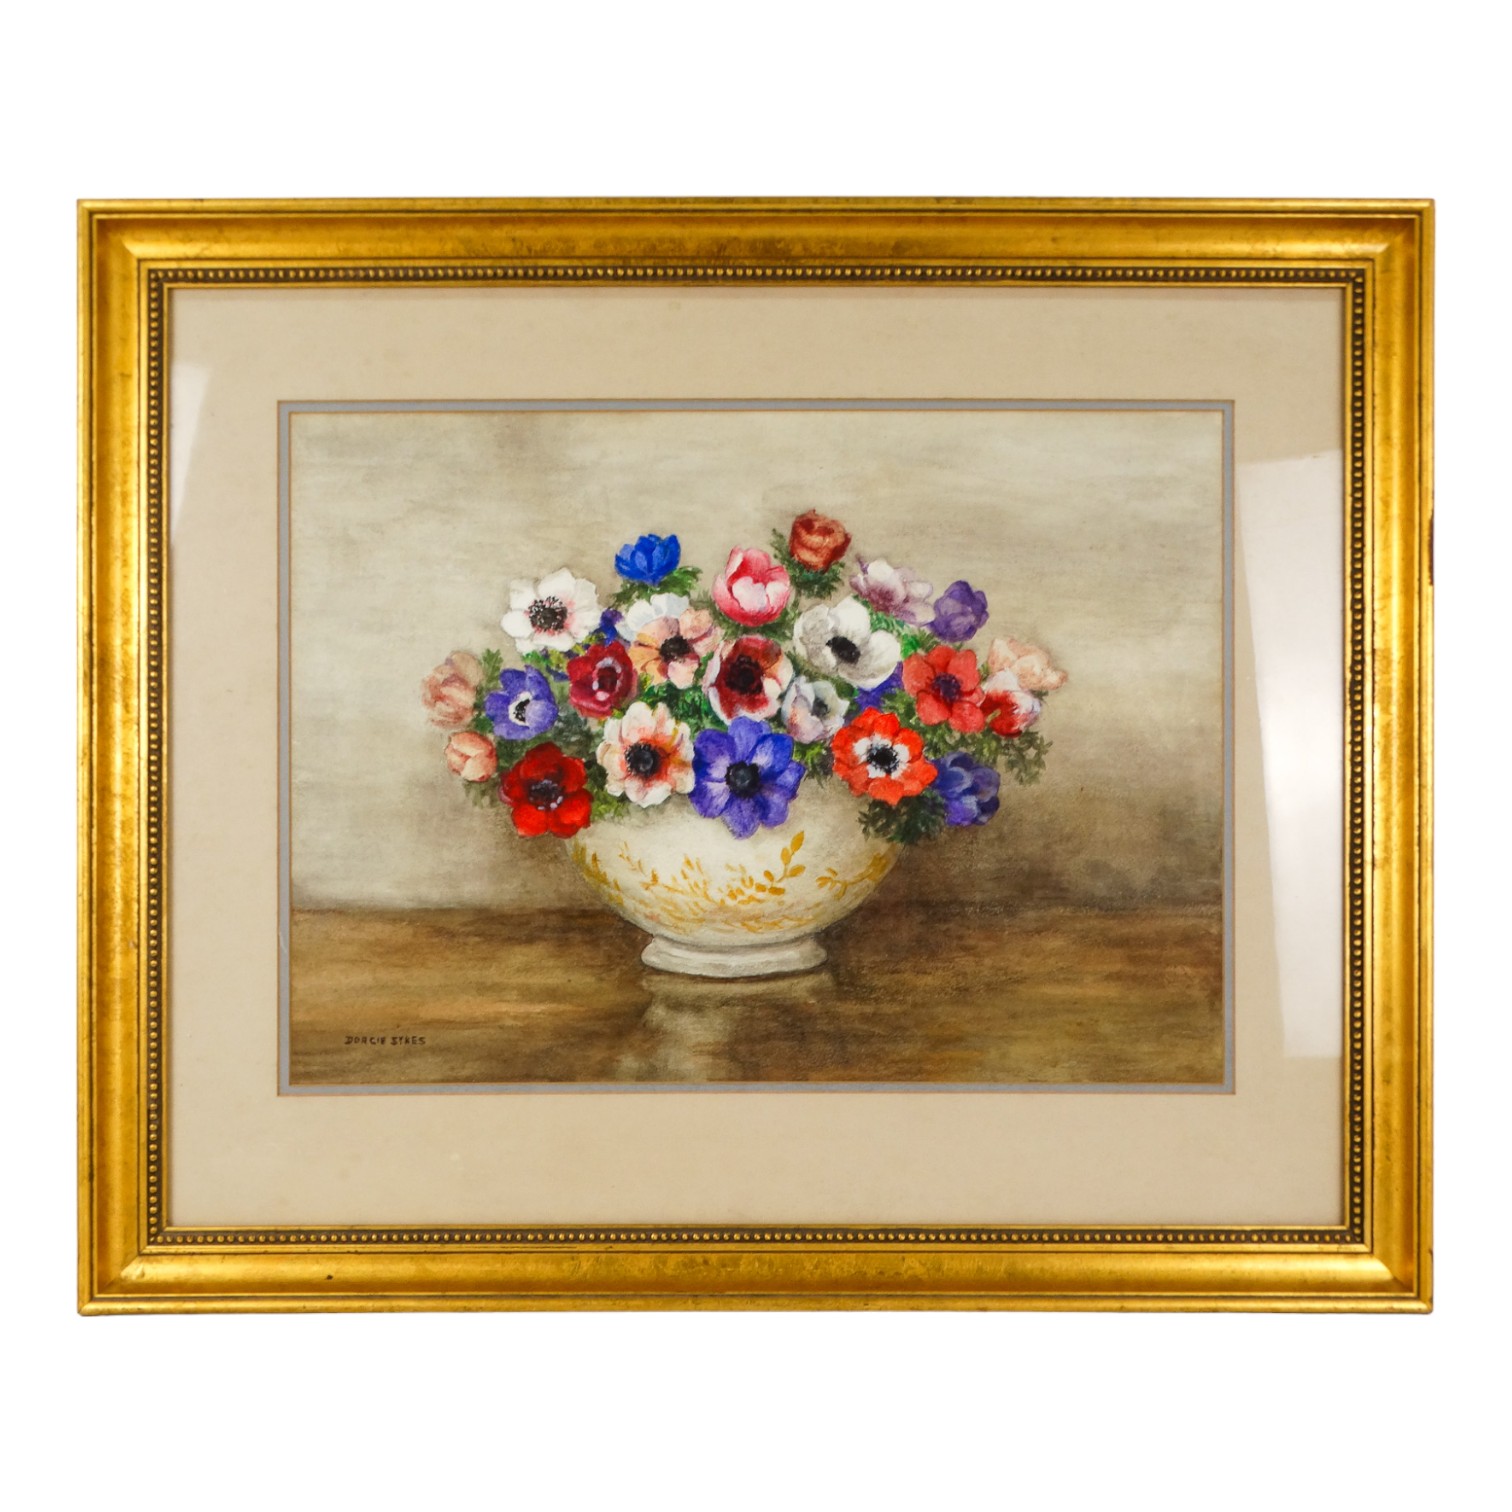 # Dorcie SYKES (1908-1998) Still Life Flowers Watercolour Signed lower left Framed and glazed - Image 2 of 4